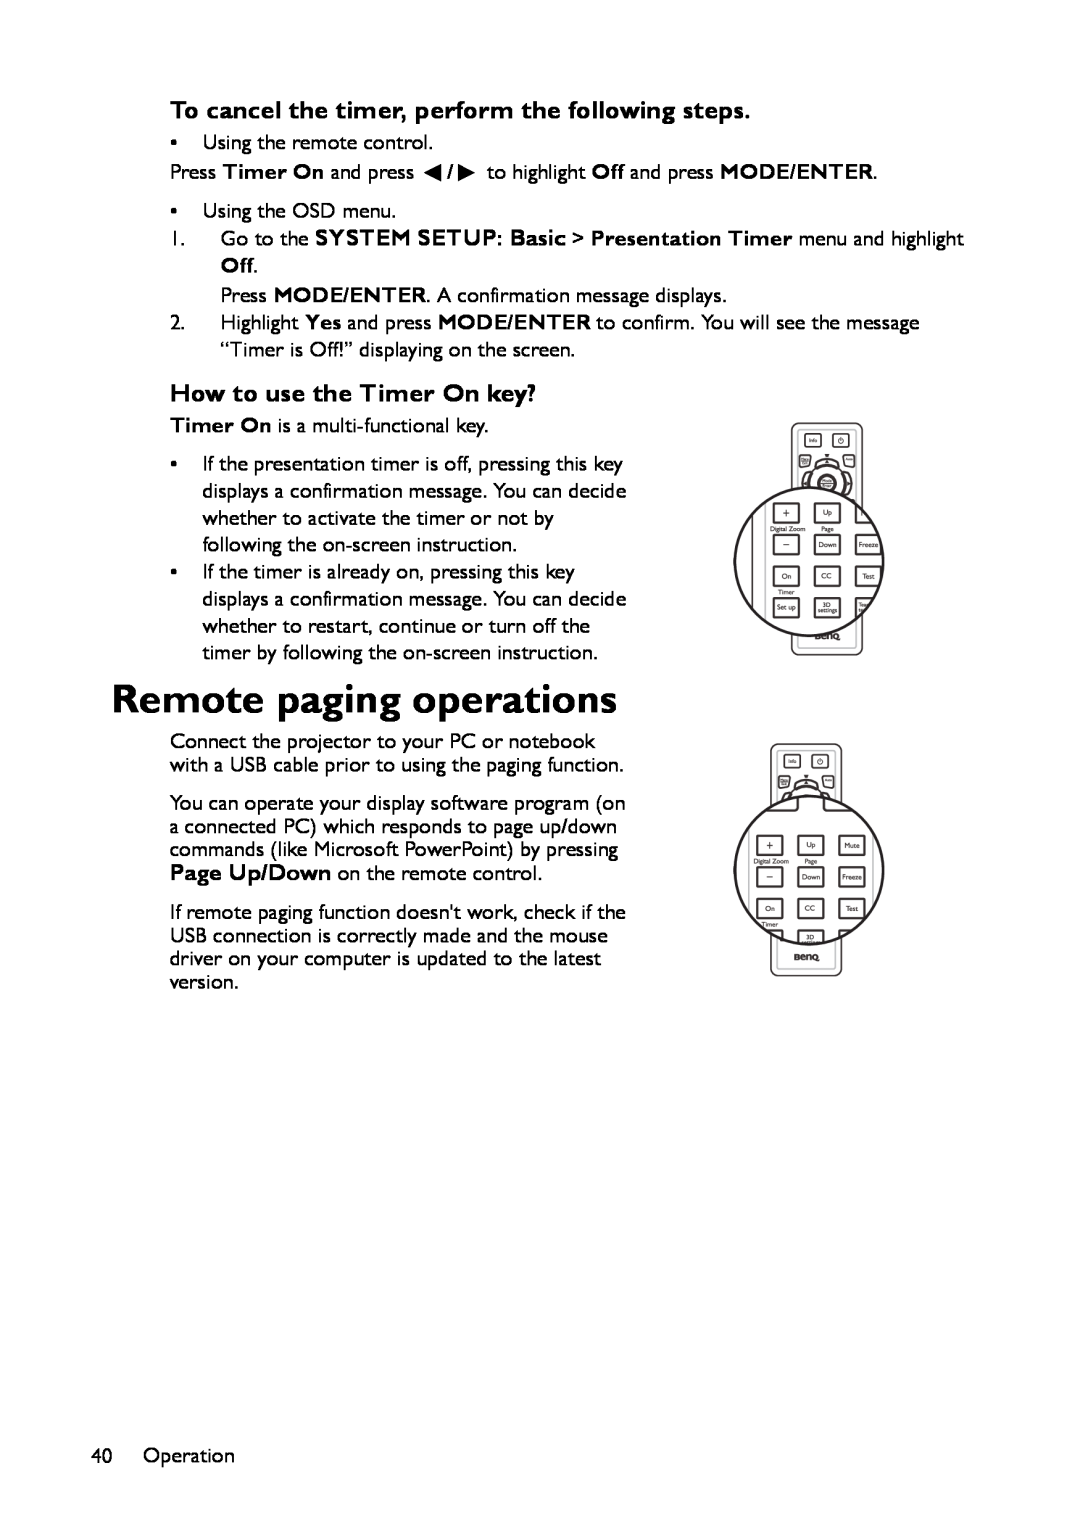 BenQ MS521 Remote paging operations, To cancel the timer, perform the following steps, How to use the Timer On key? 